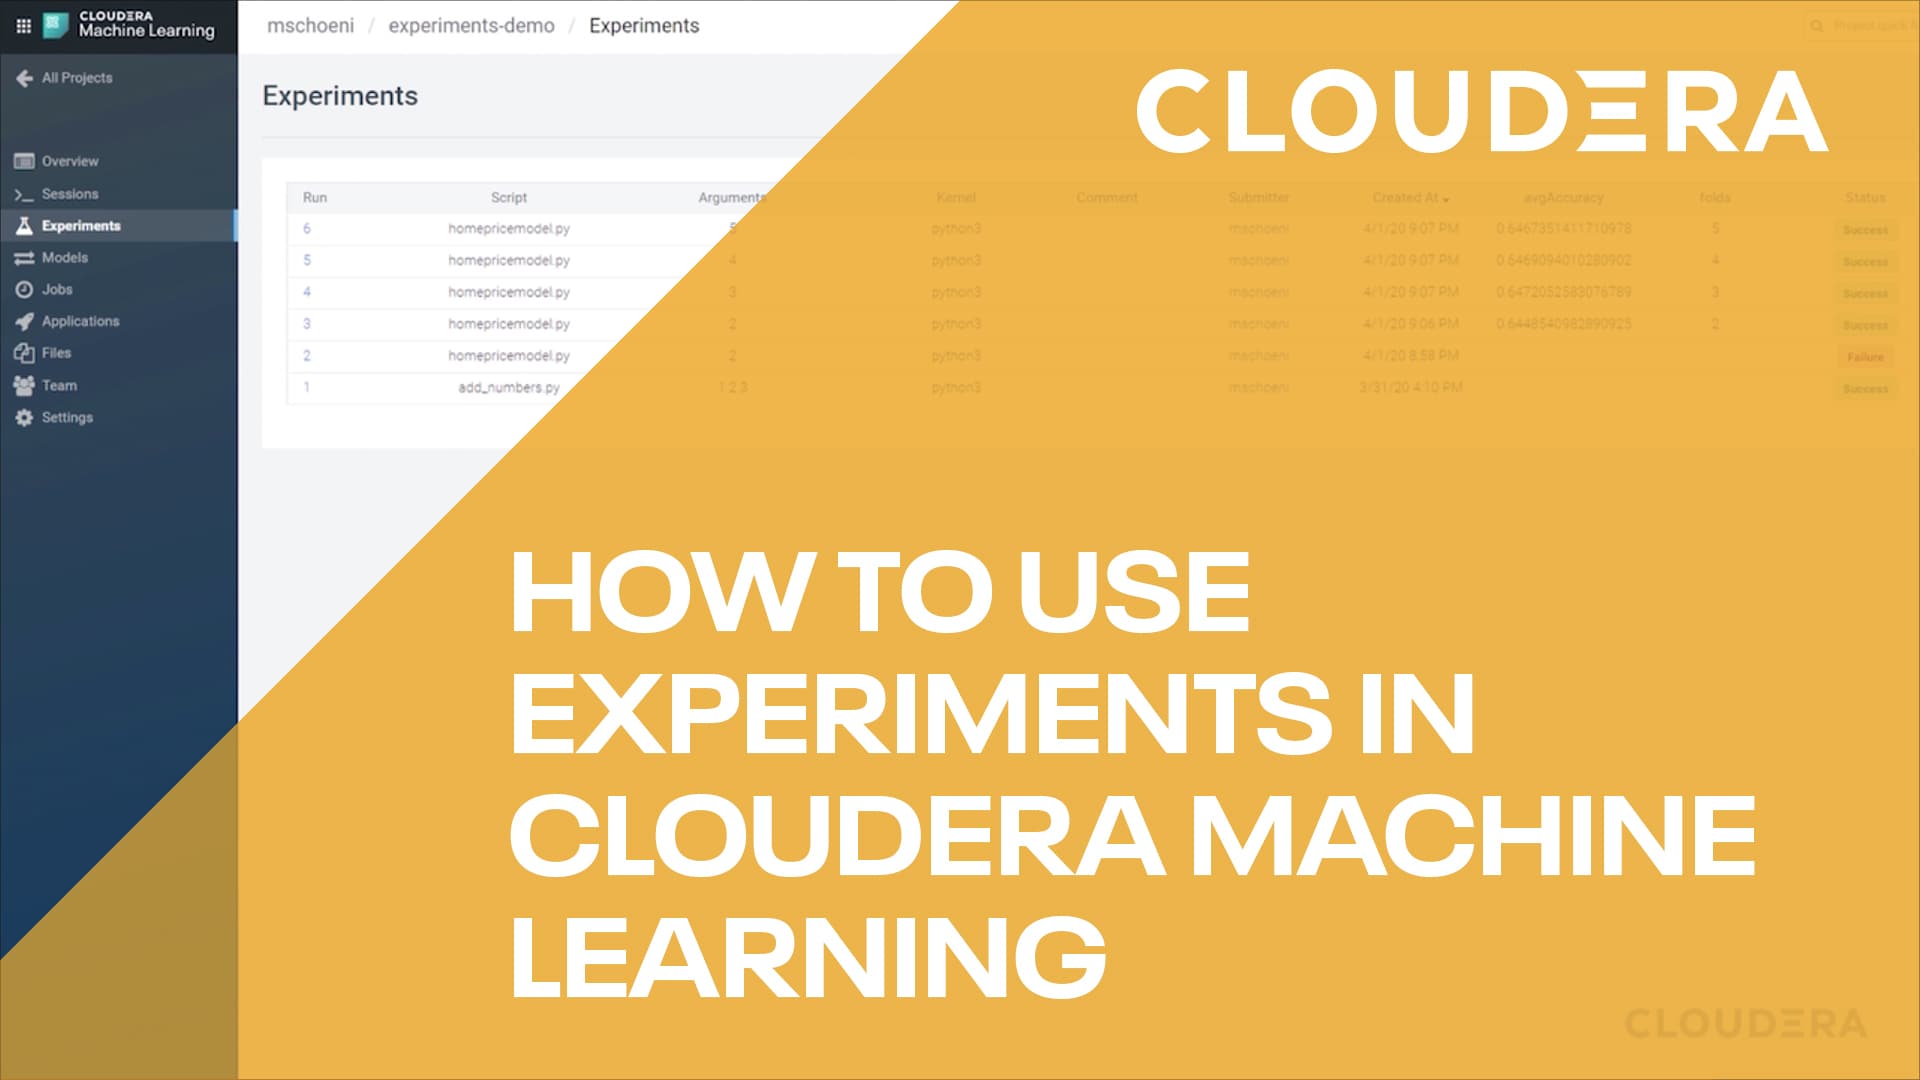 How to use Experiments in Cloudera Machine Learning